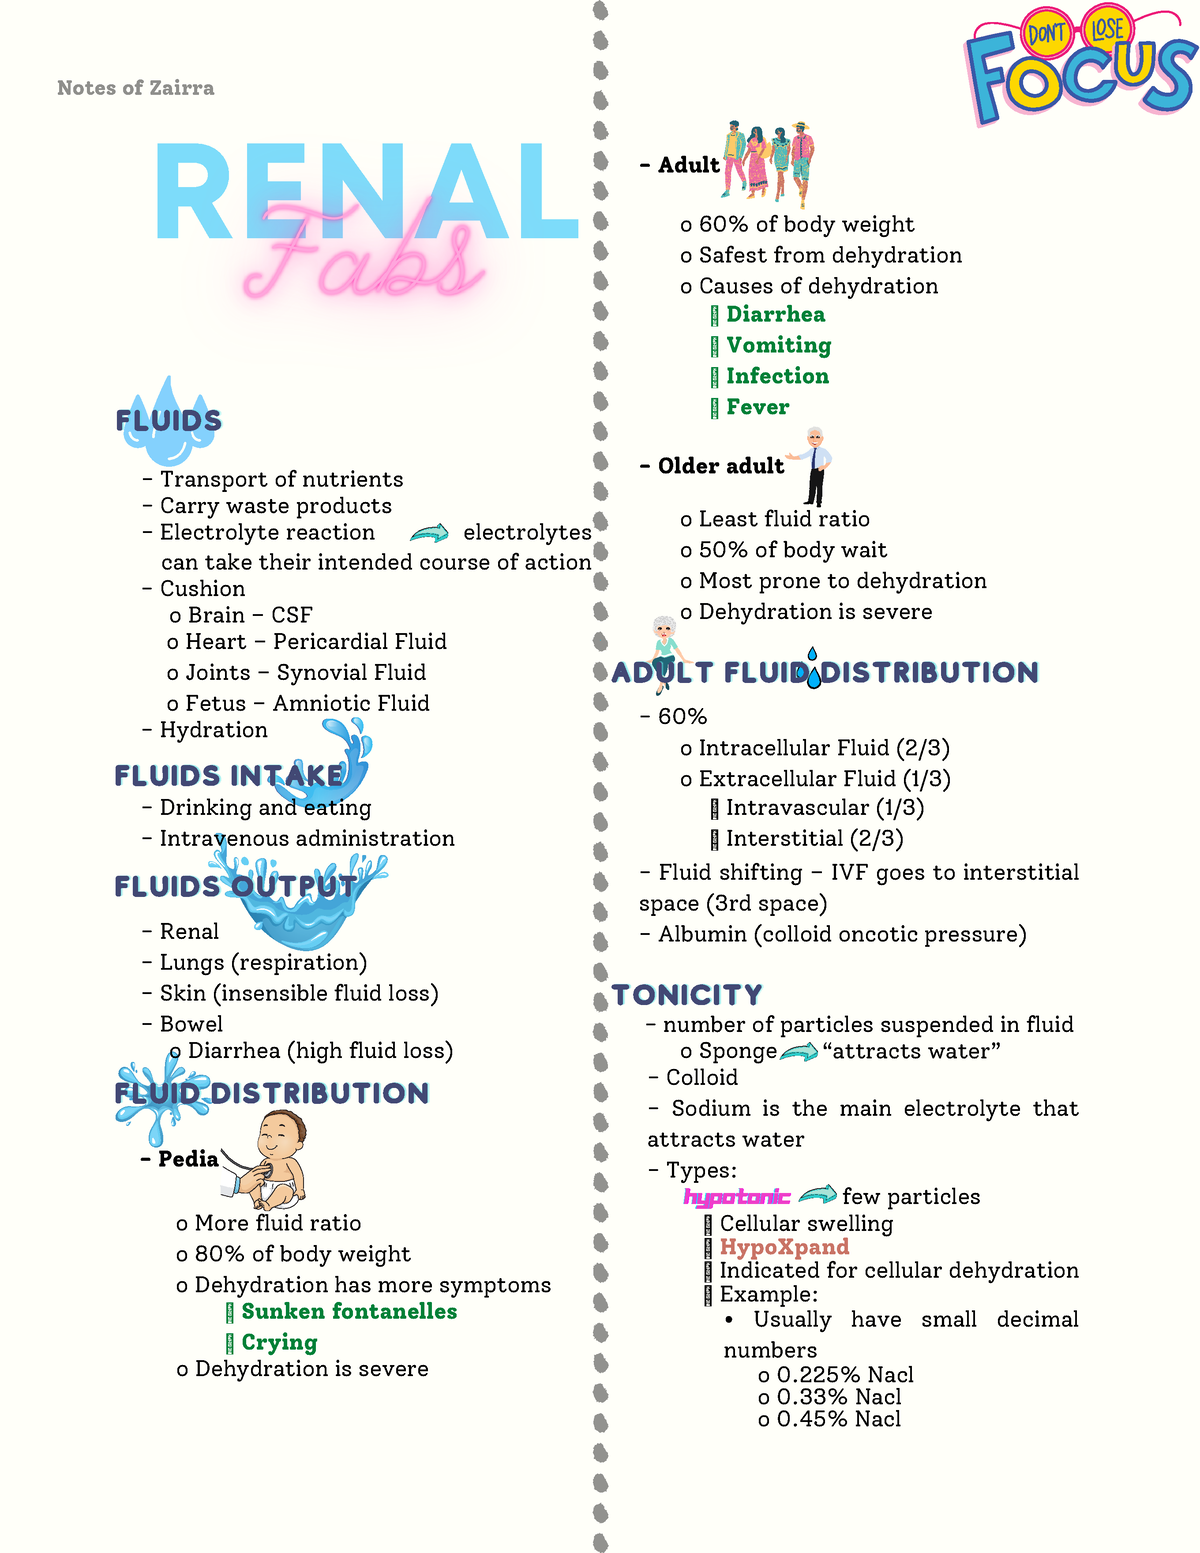 4 Toprank 4 - Renal FABS - Nursing notes - Colloid Sodium is the main ...